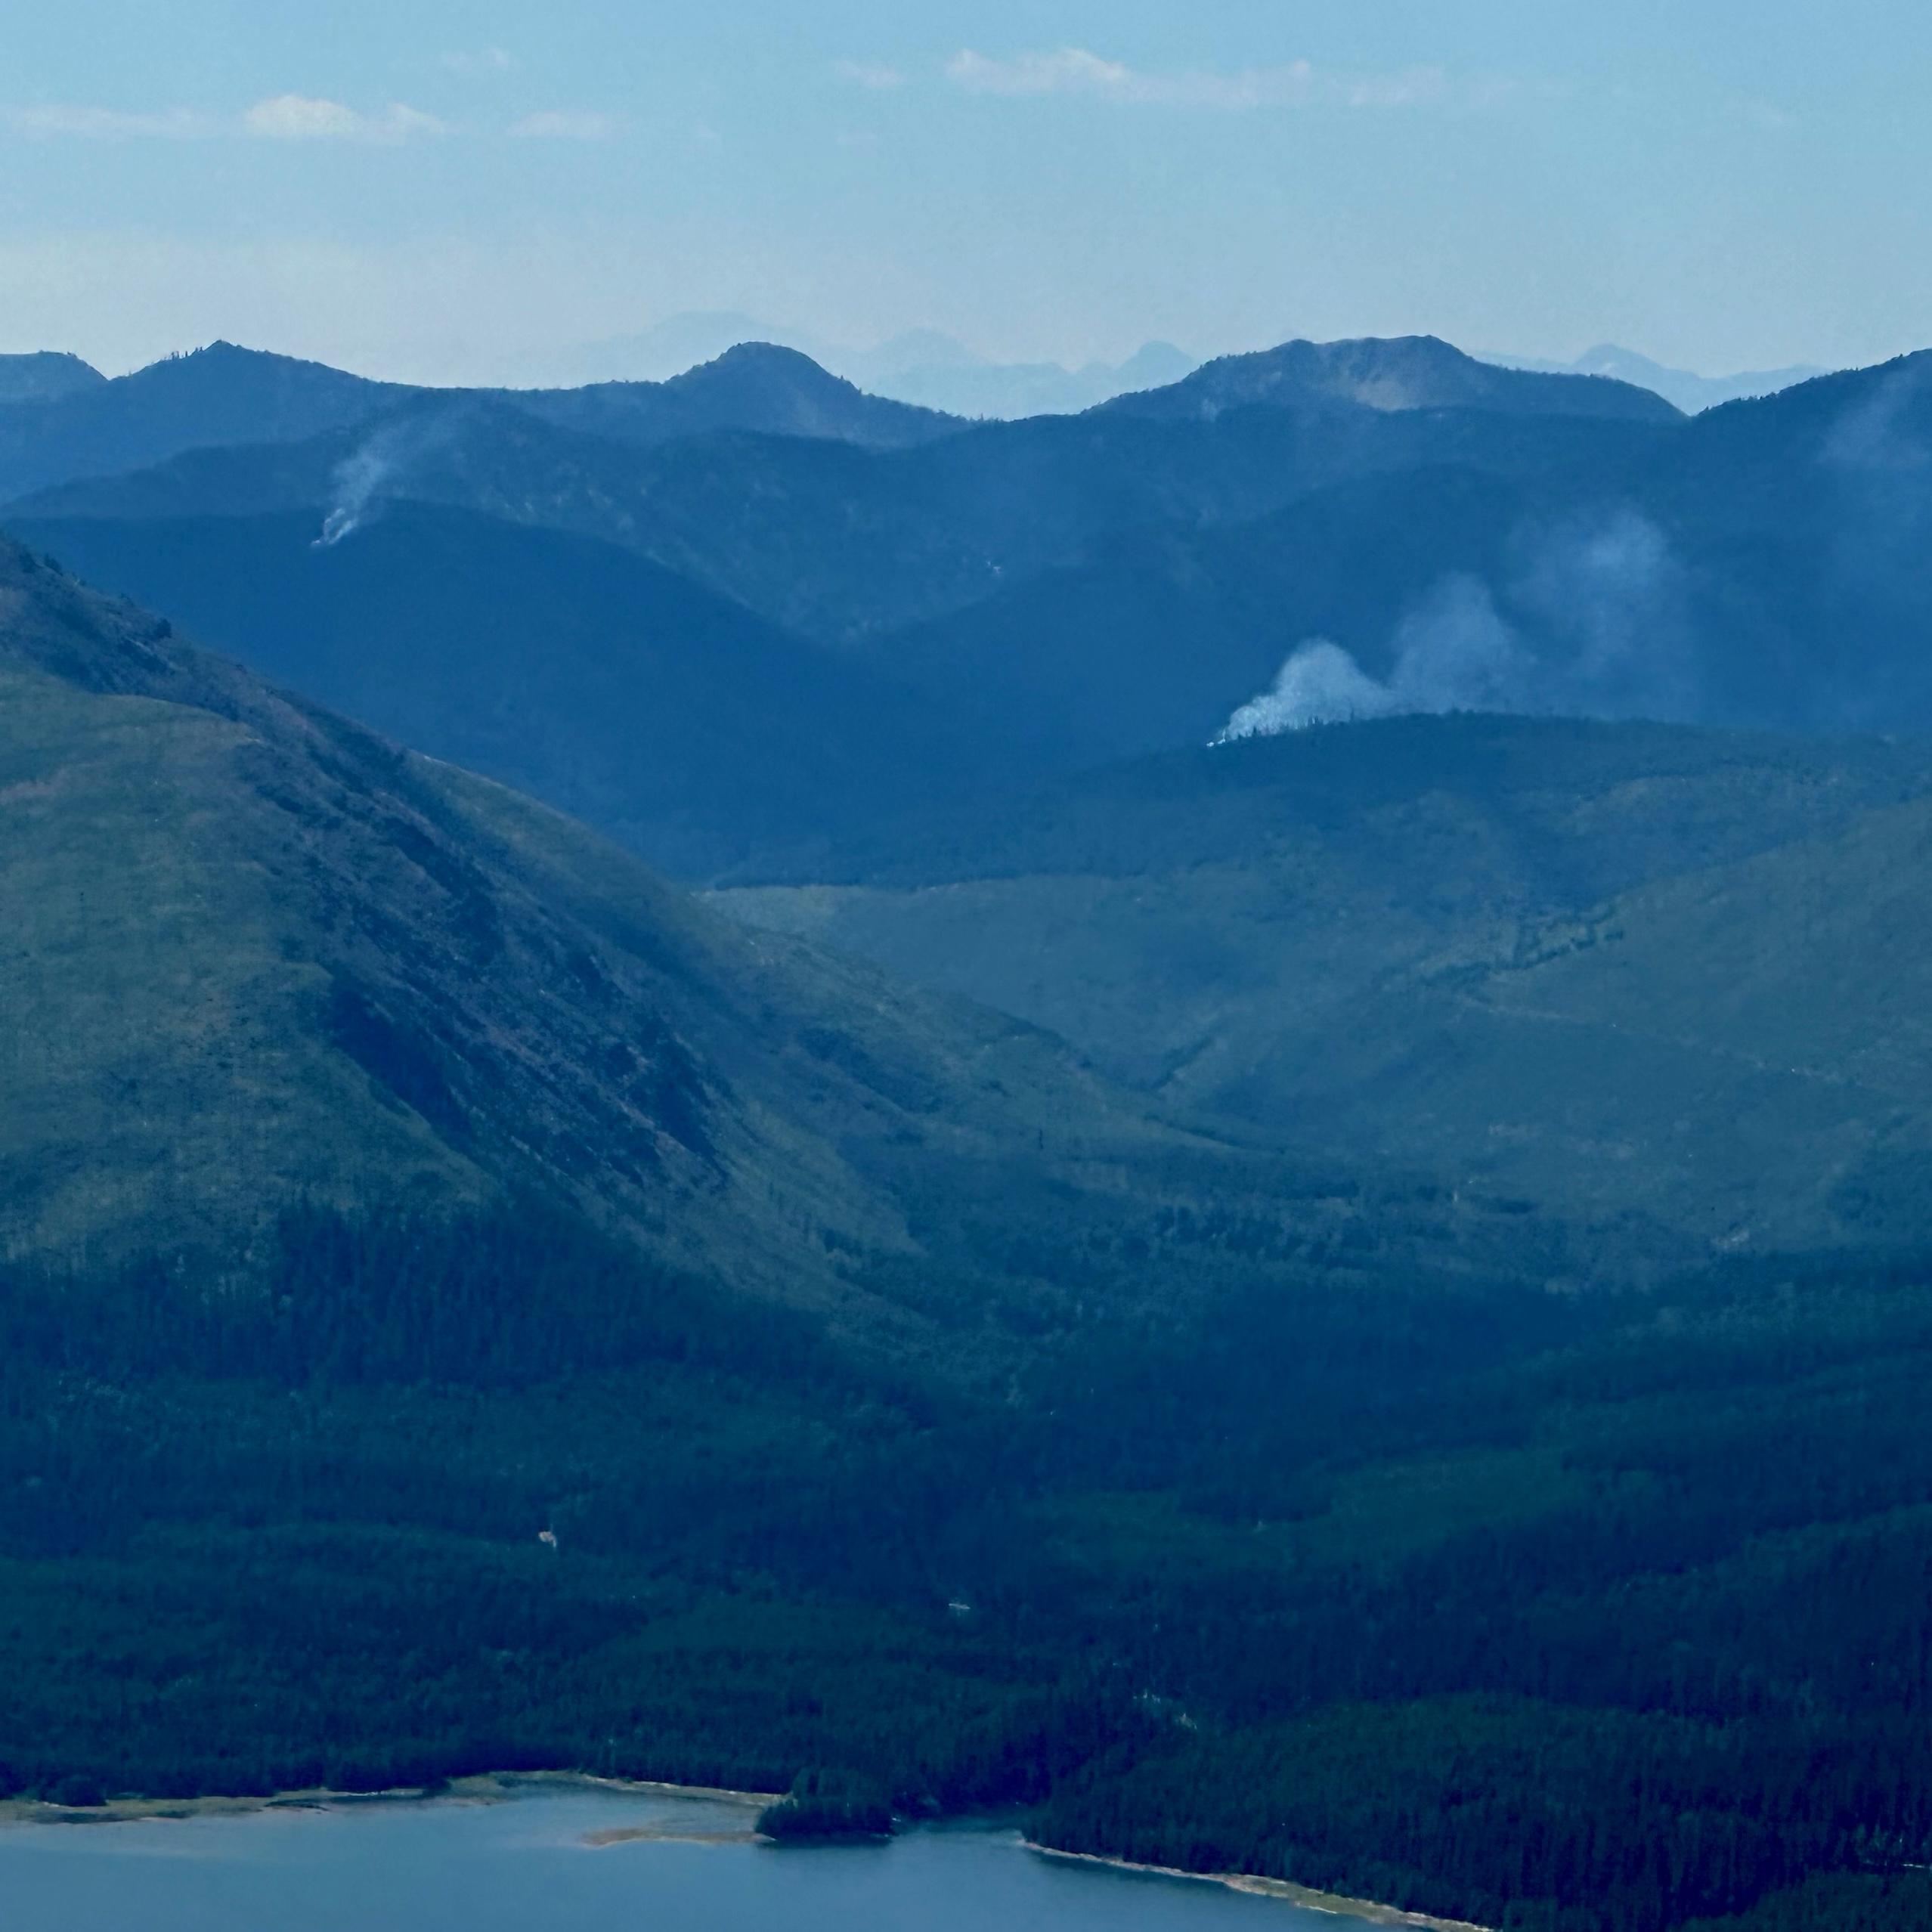 Mountain landscape with Kah Fire in lower right frame, Sullivan Fire on the left side of the frame, and Con Kelly Fire near the top of the ridge above Kah Fire.